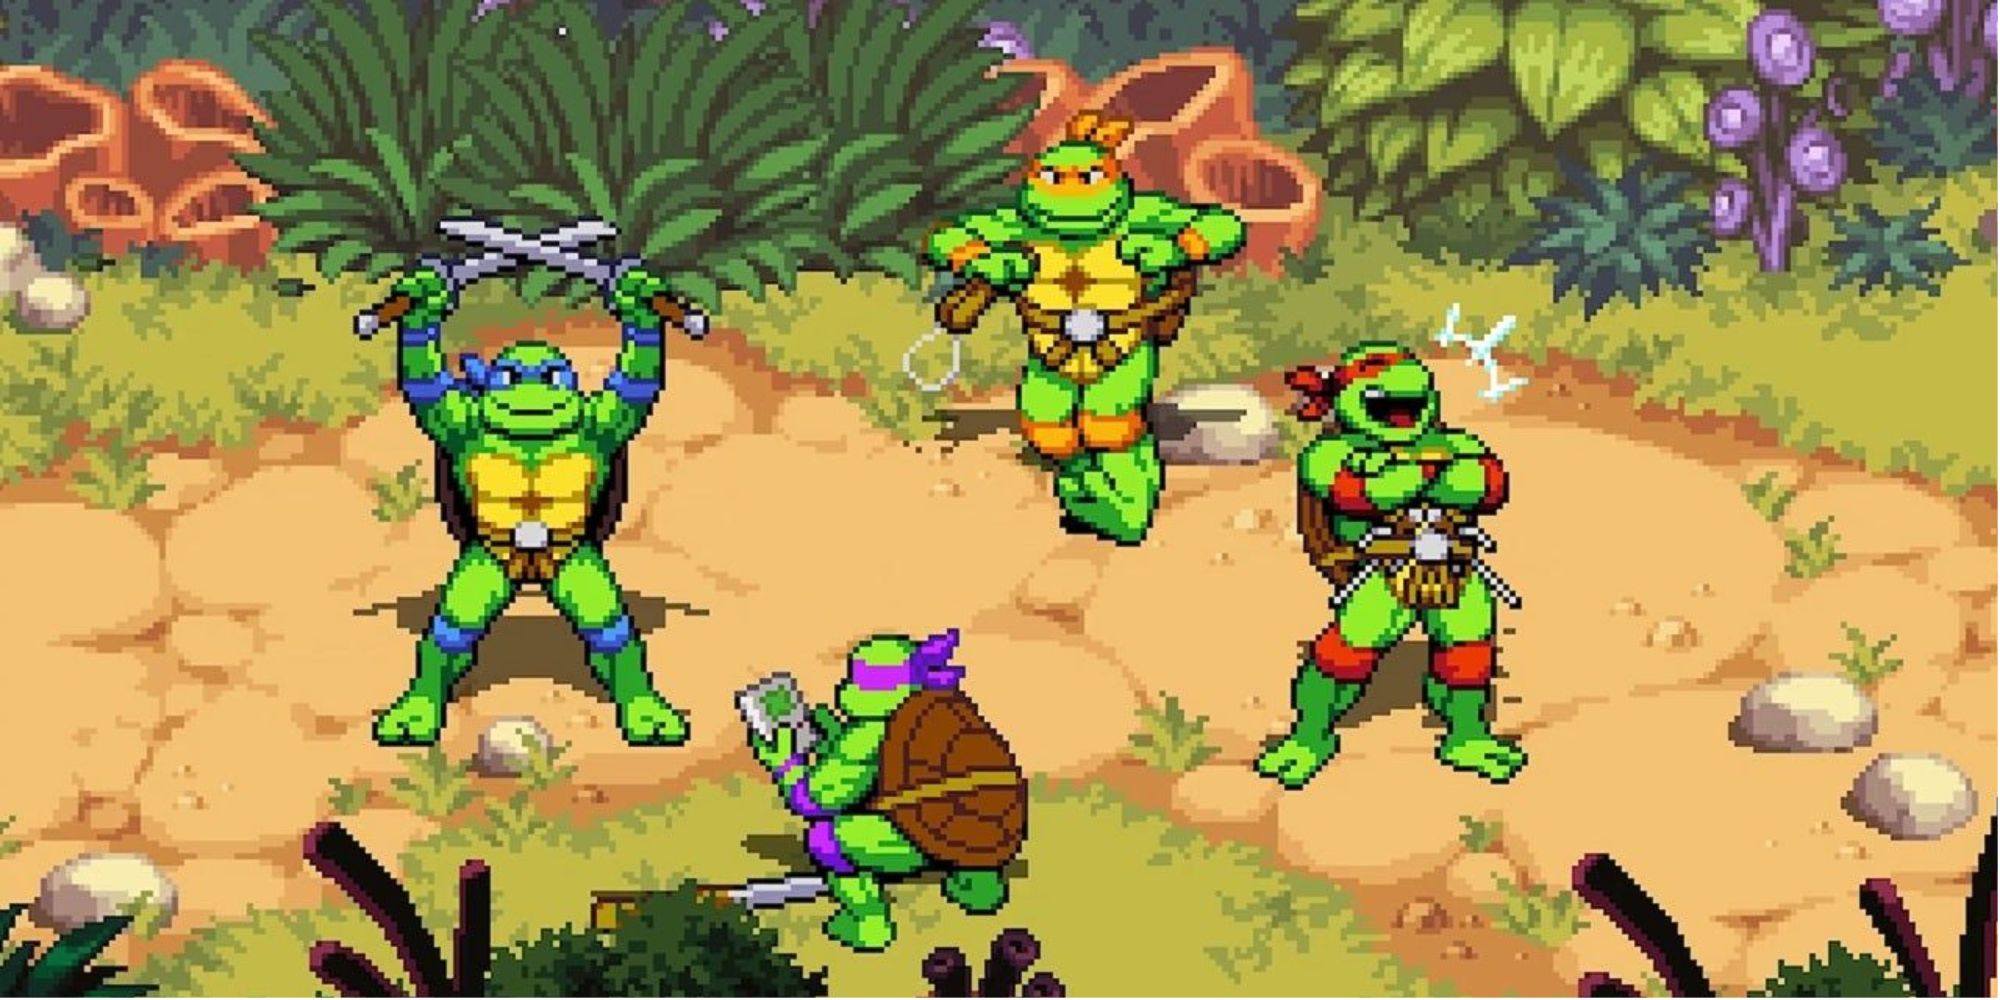 [From back left and back right to front left and front right] Leonardo, Michelangelo, Donatello, and Raphael Taunting in Teenage Mutant Ninja Turtles: Shredder's Revenge